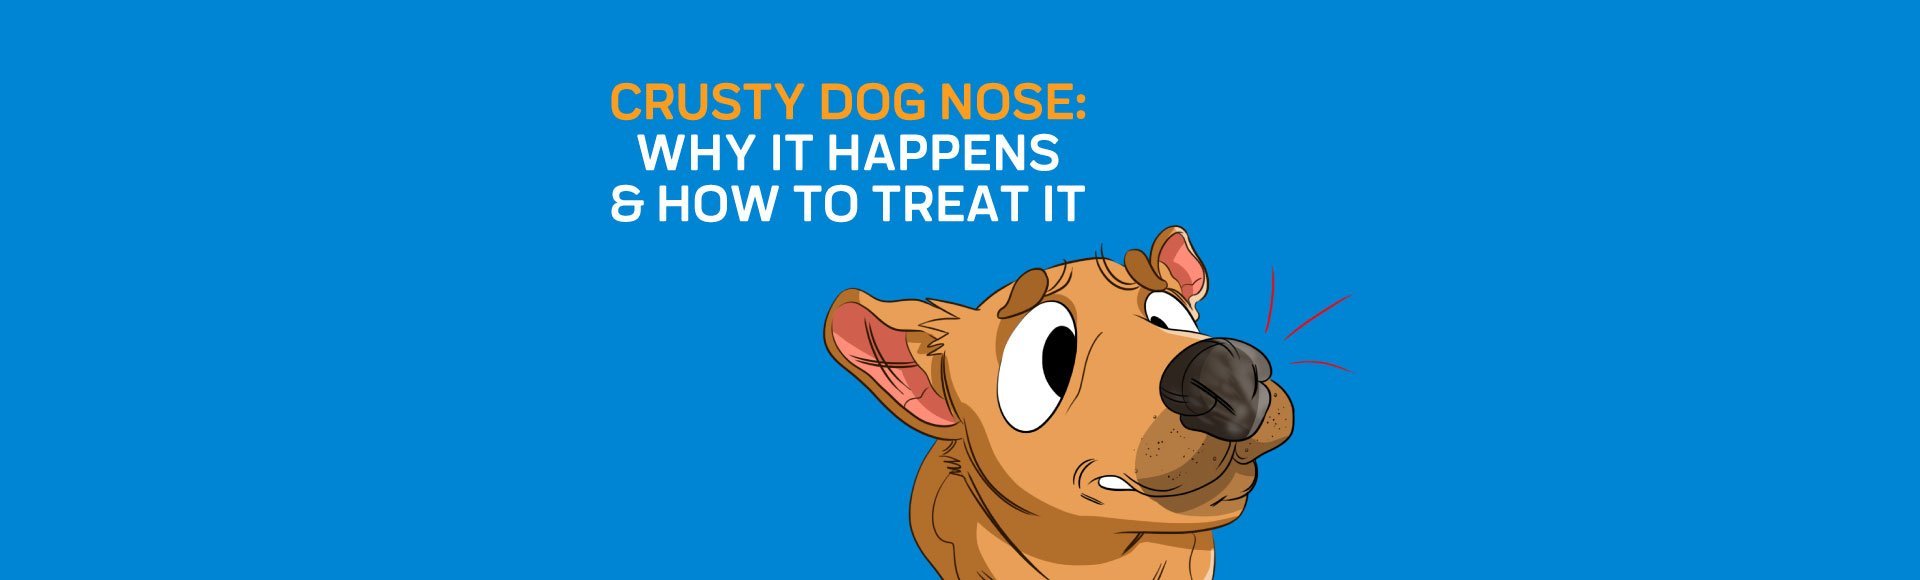 how do i clean my dogs crusty nose